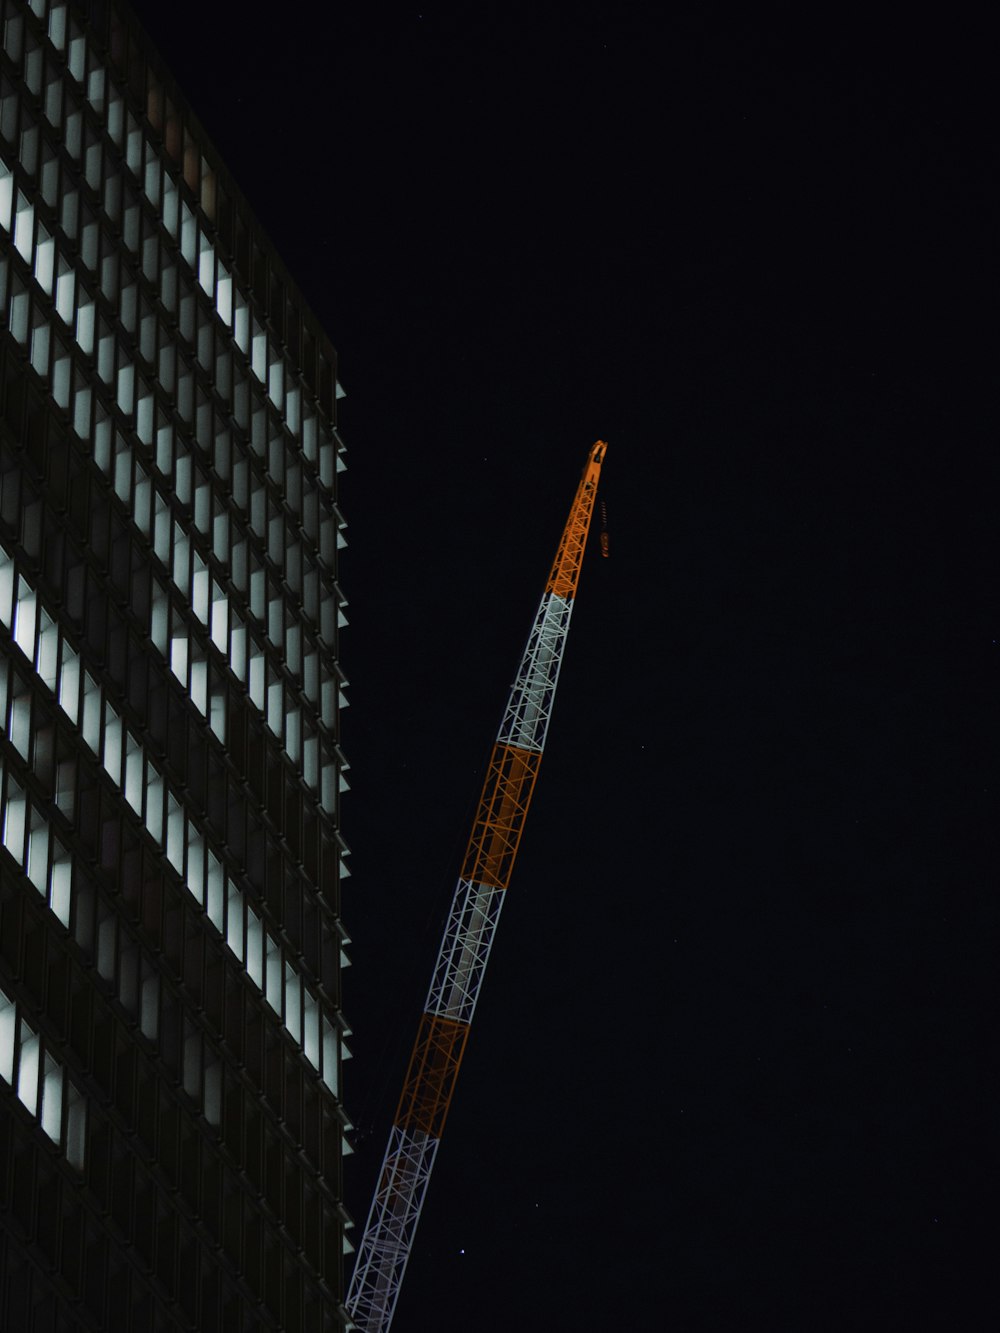 a crane is in the air next to a tall building